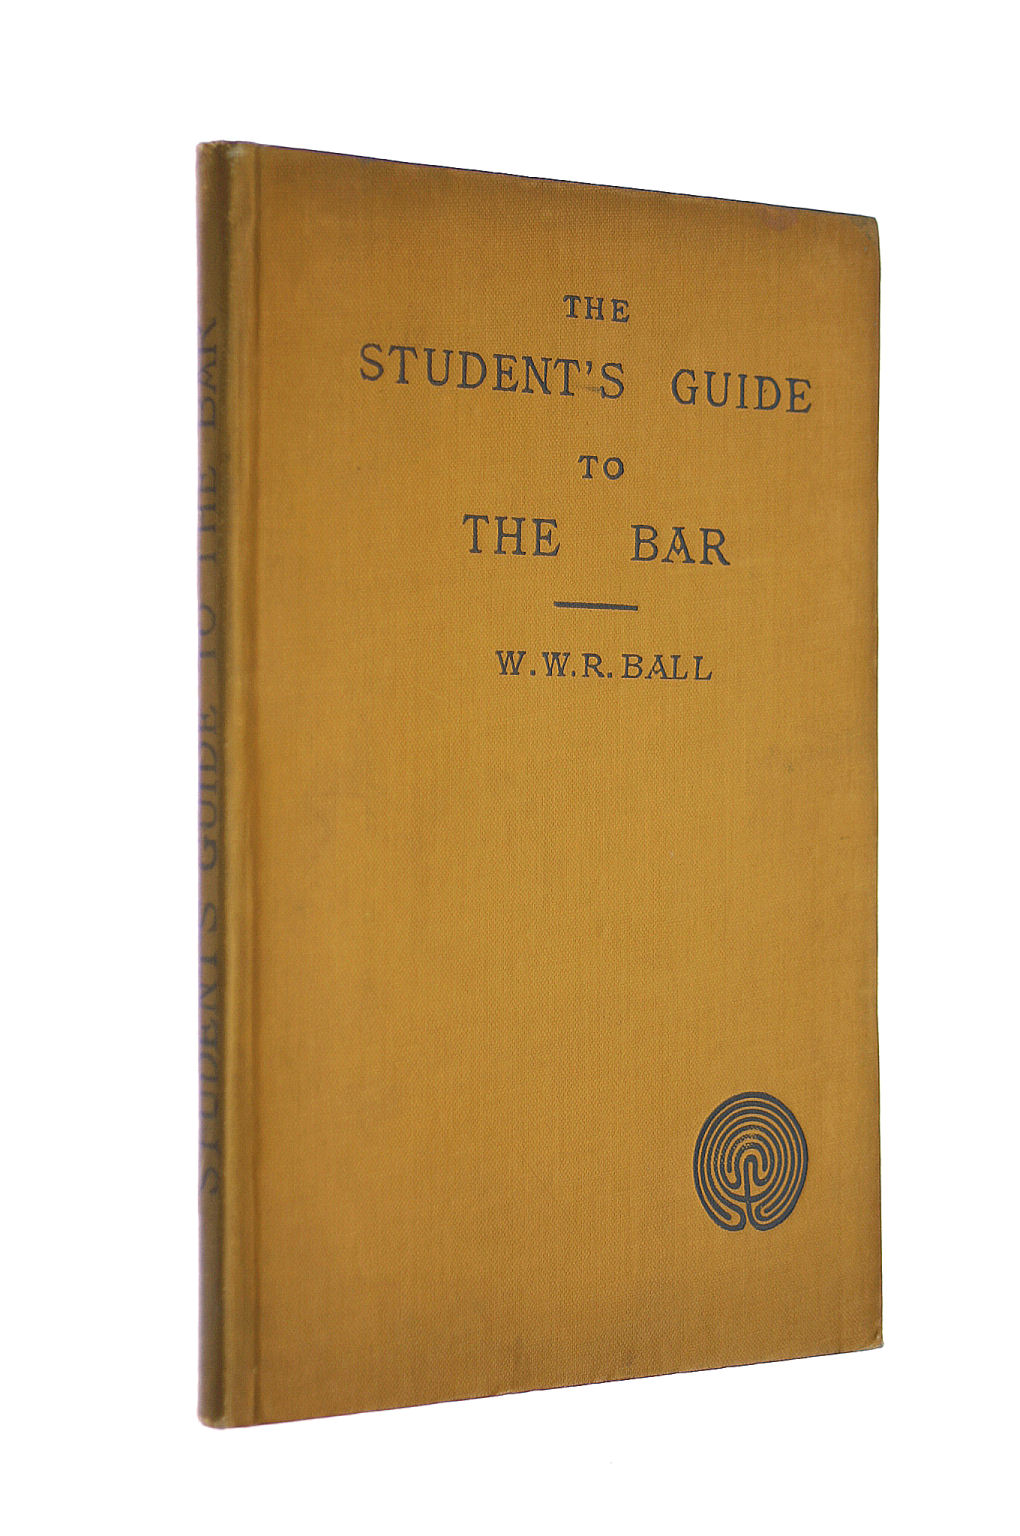 W W R BALL - The Student's Guide to the Bar